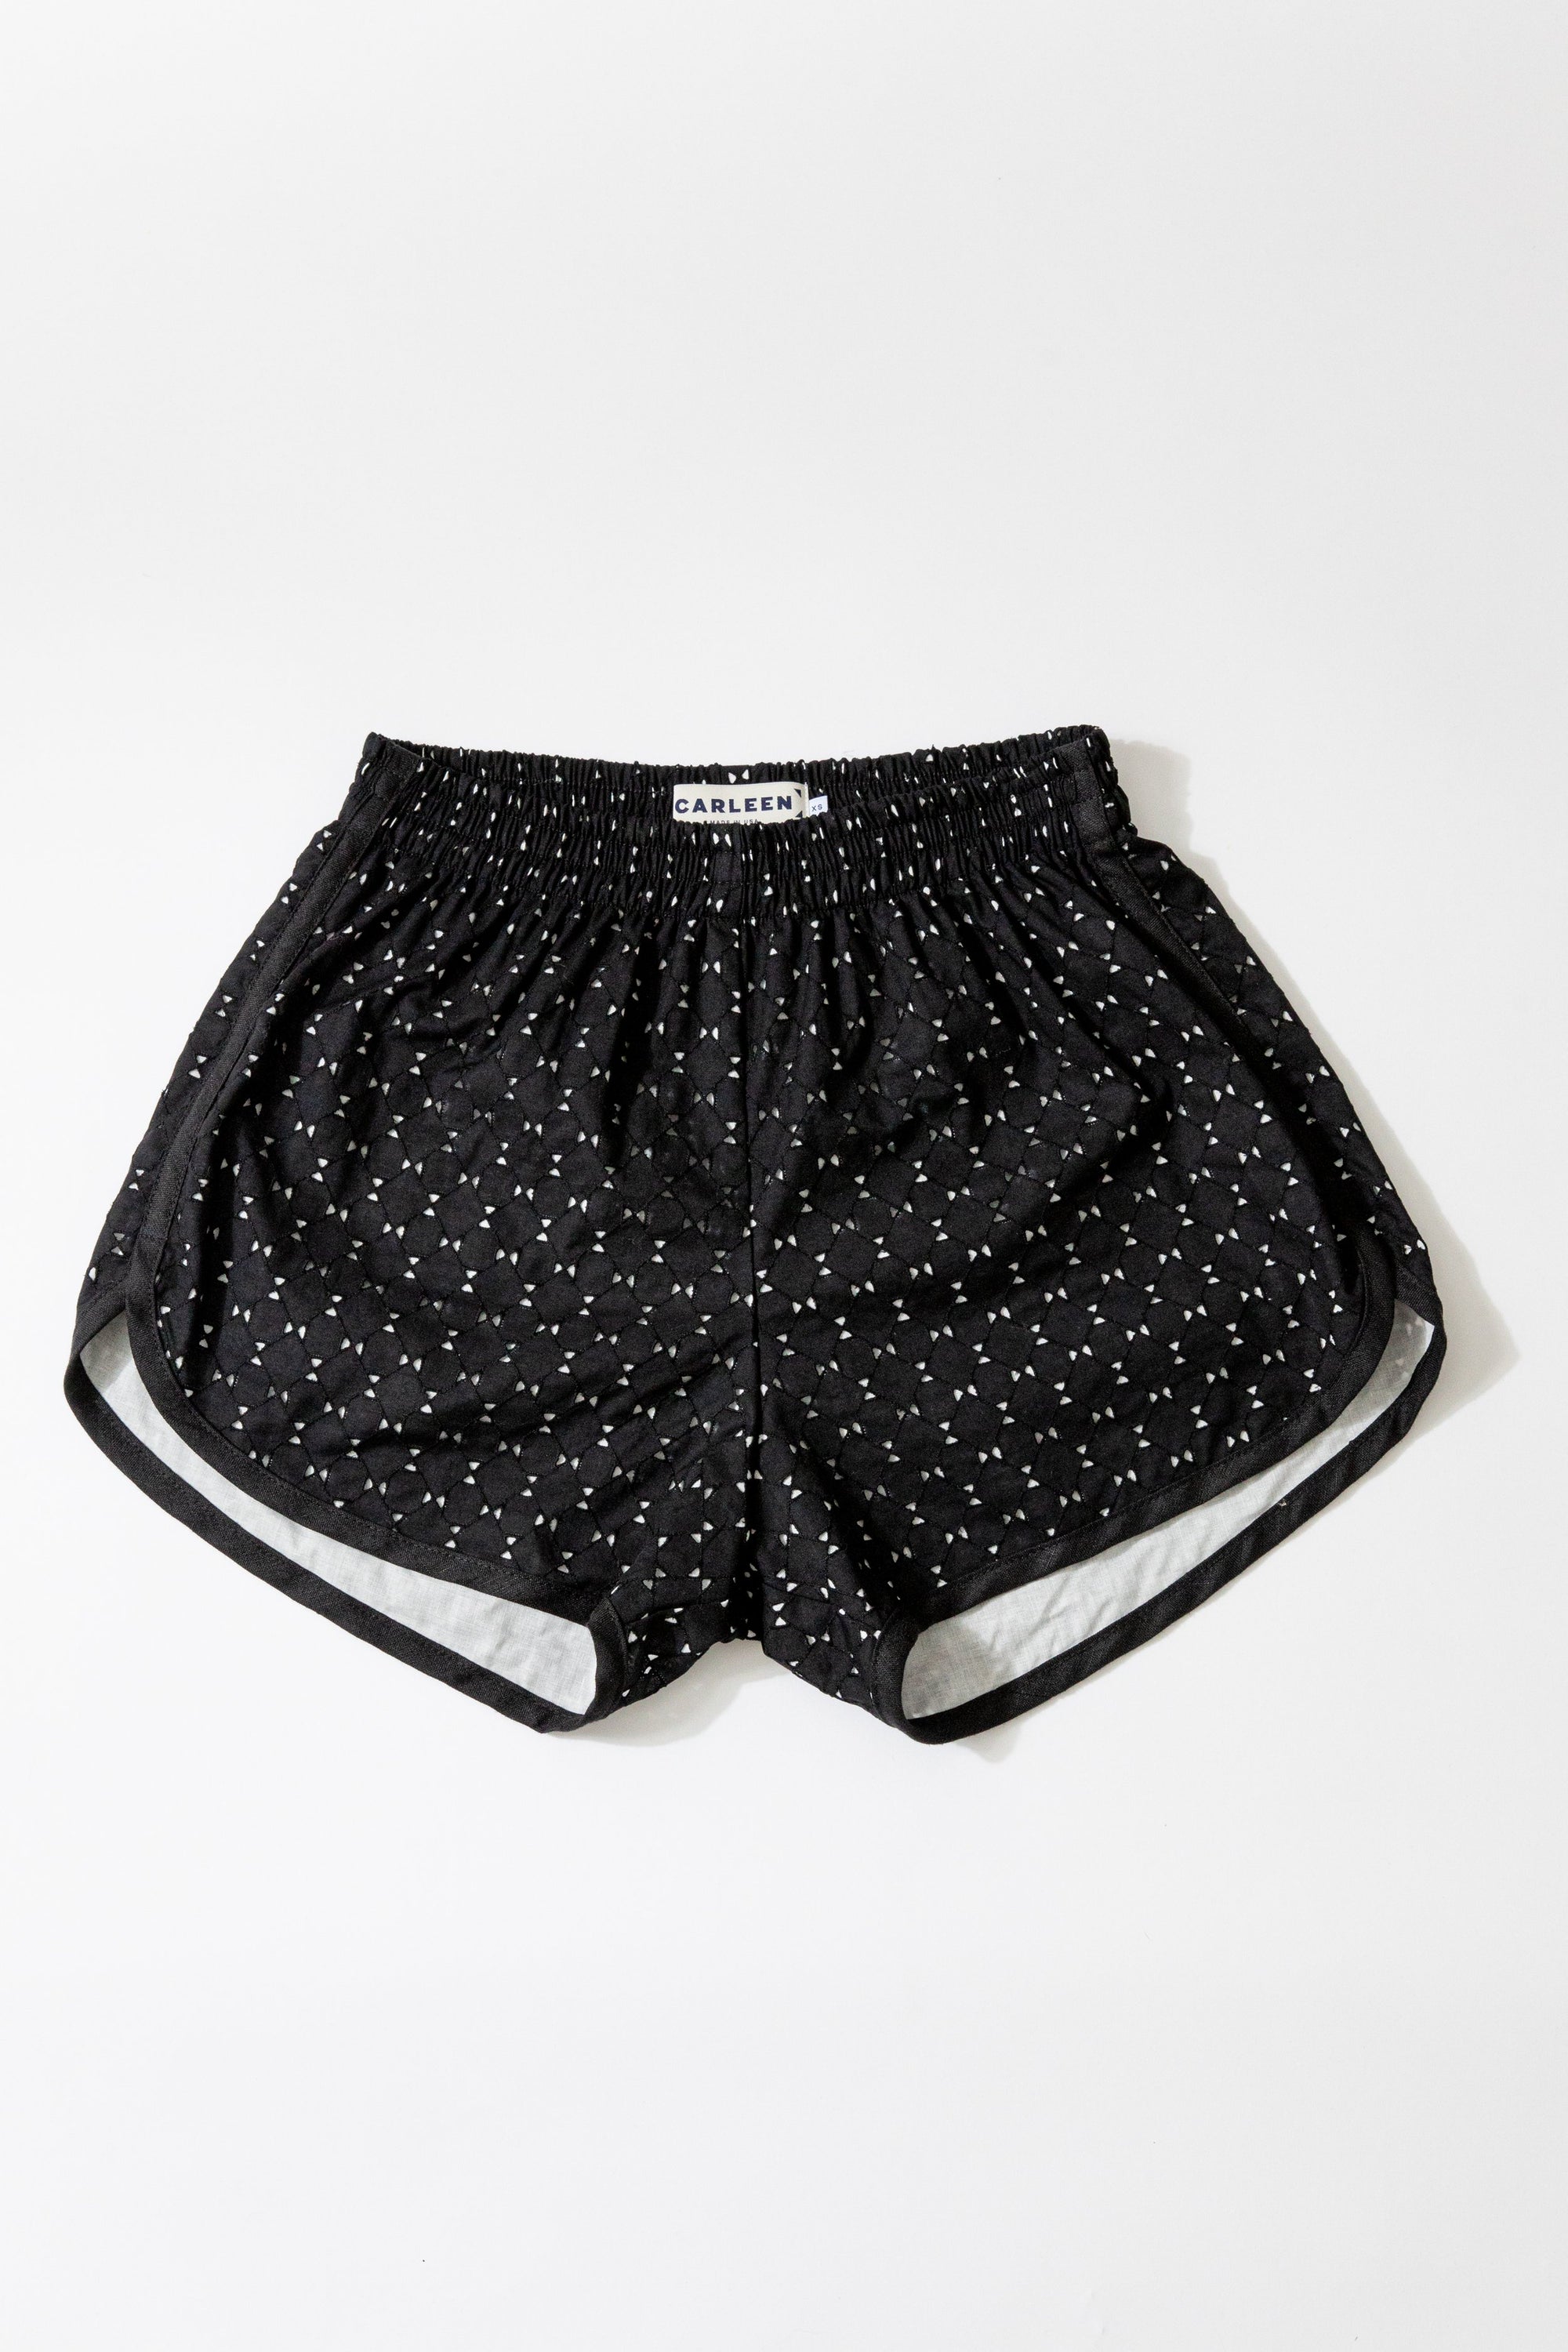 Tess Track Shorts in Black Lace by Carleen